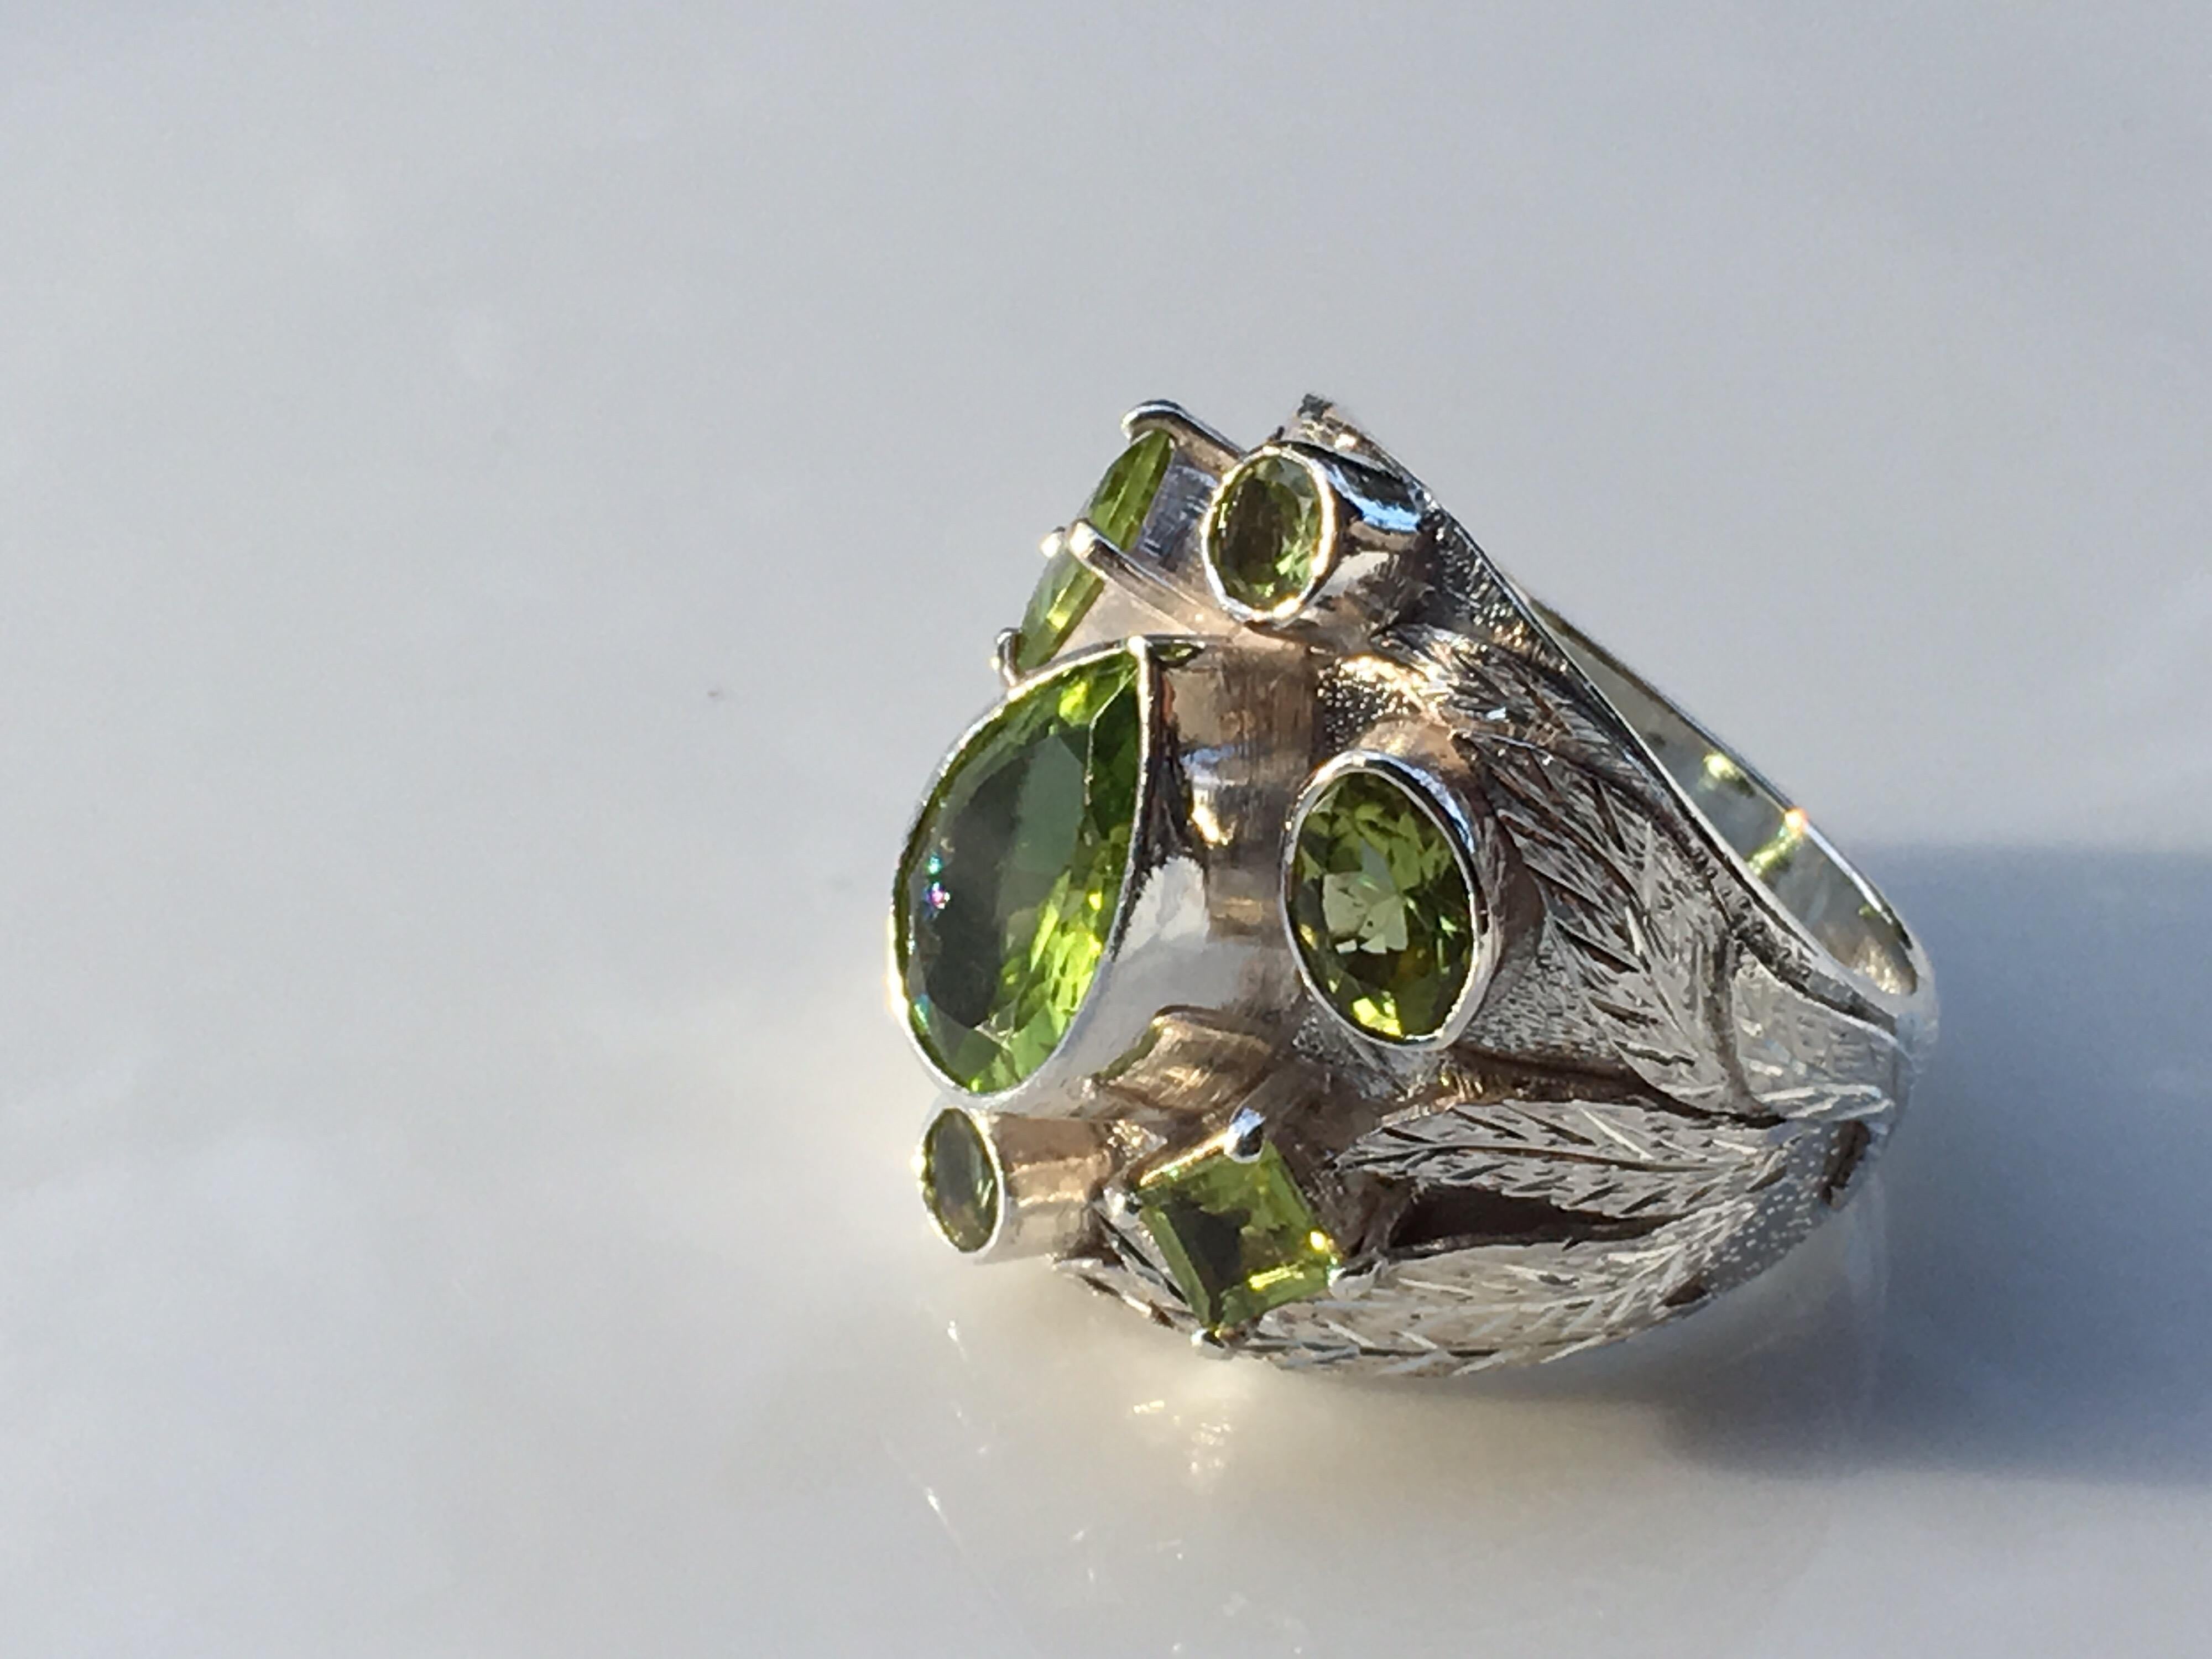 Natural Peridot set in sterling silver is handcrafted one of a kind Ring. seven stones weigh approx 7 Carat.
Size of the ring is 9.5 and the ring can be resized. Total weight of the Ring is 16.03 Gram.
Different shapes used in the rings are Oval